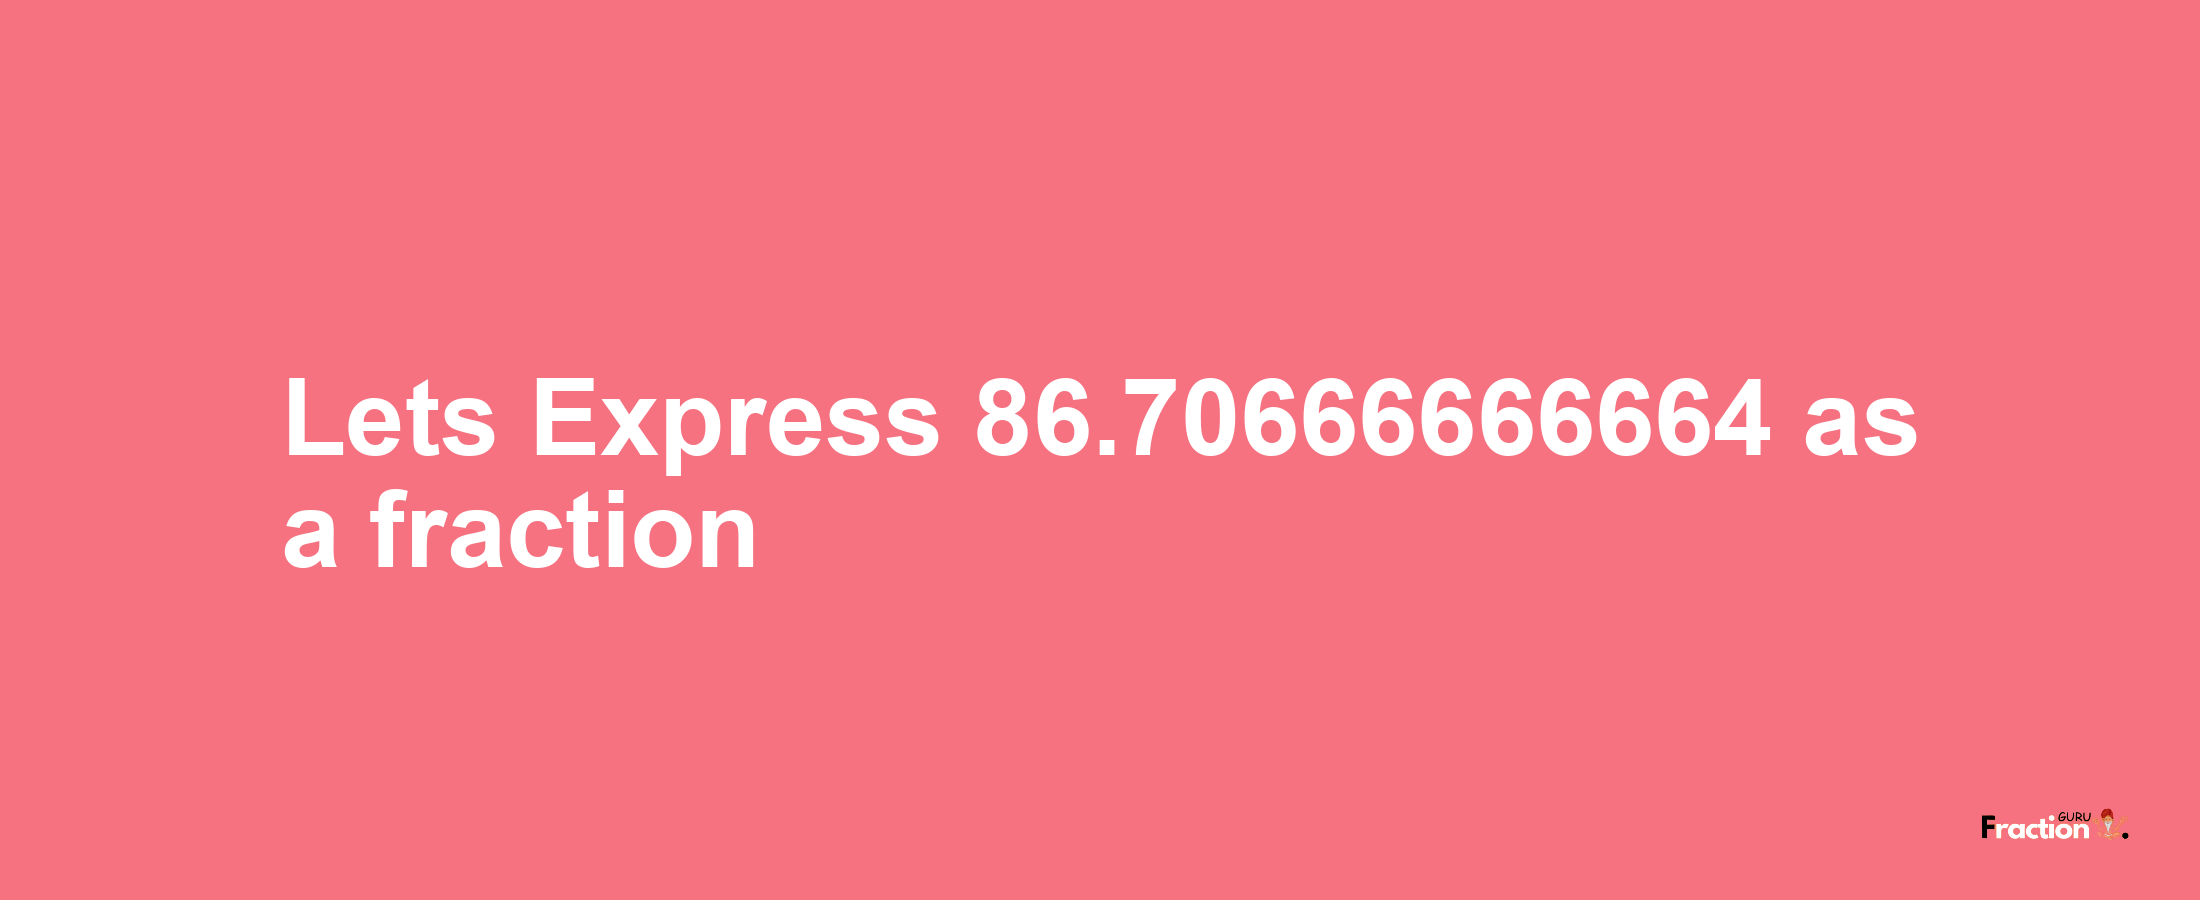 Lets Express 86.70666666664 as afraction